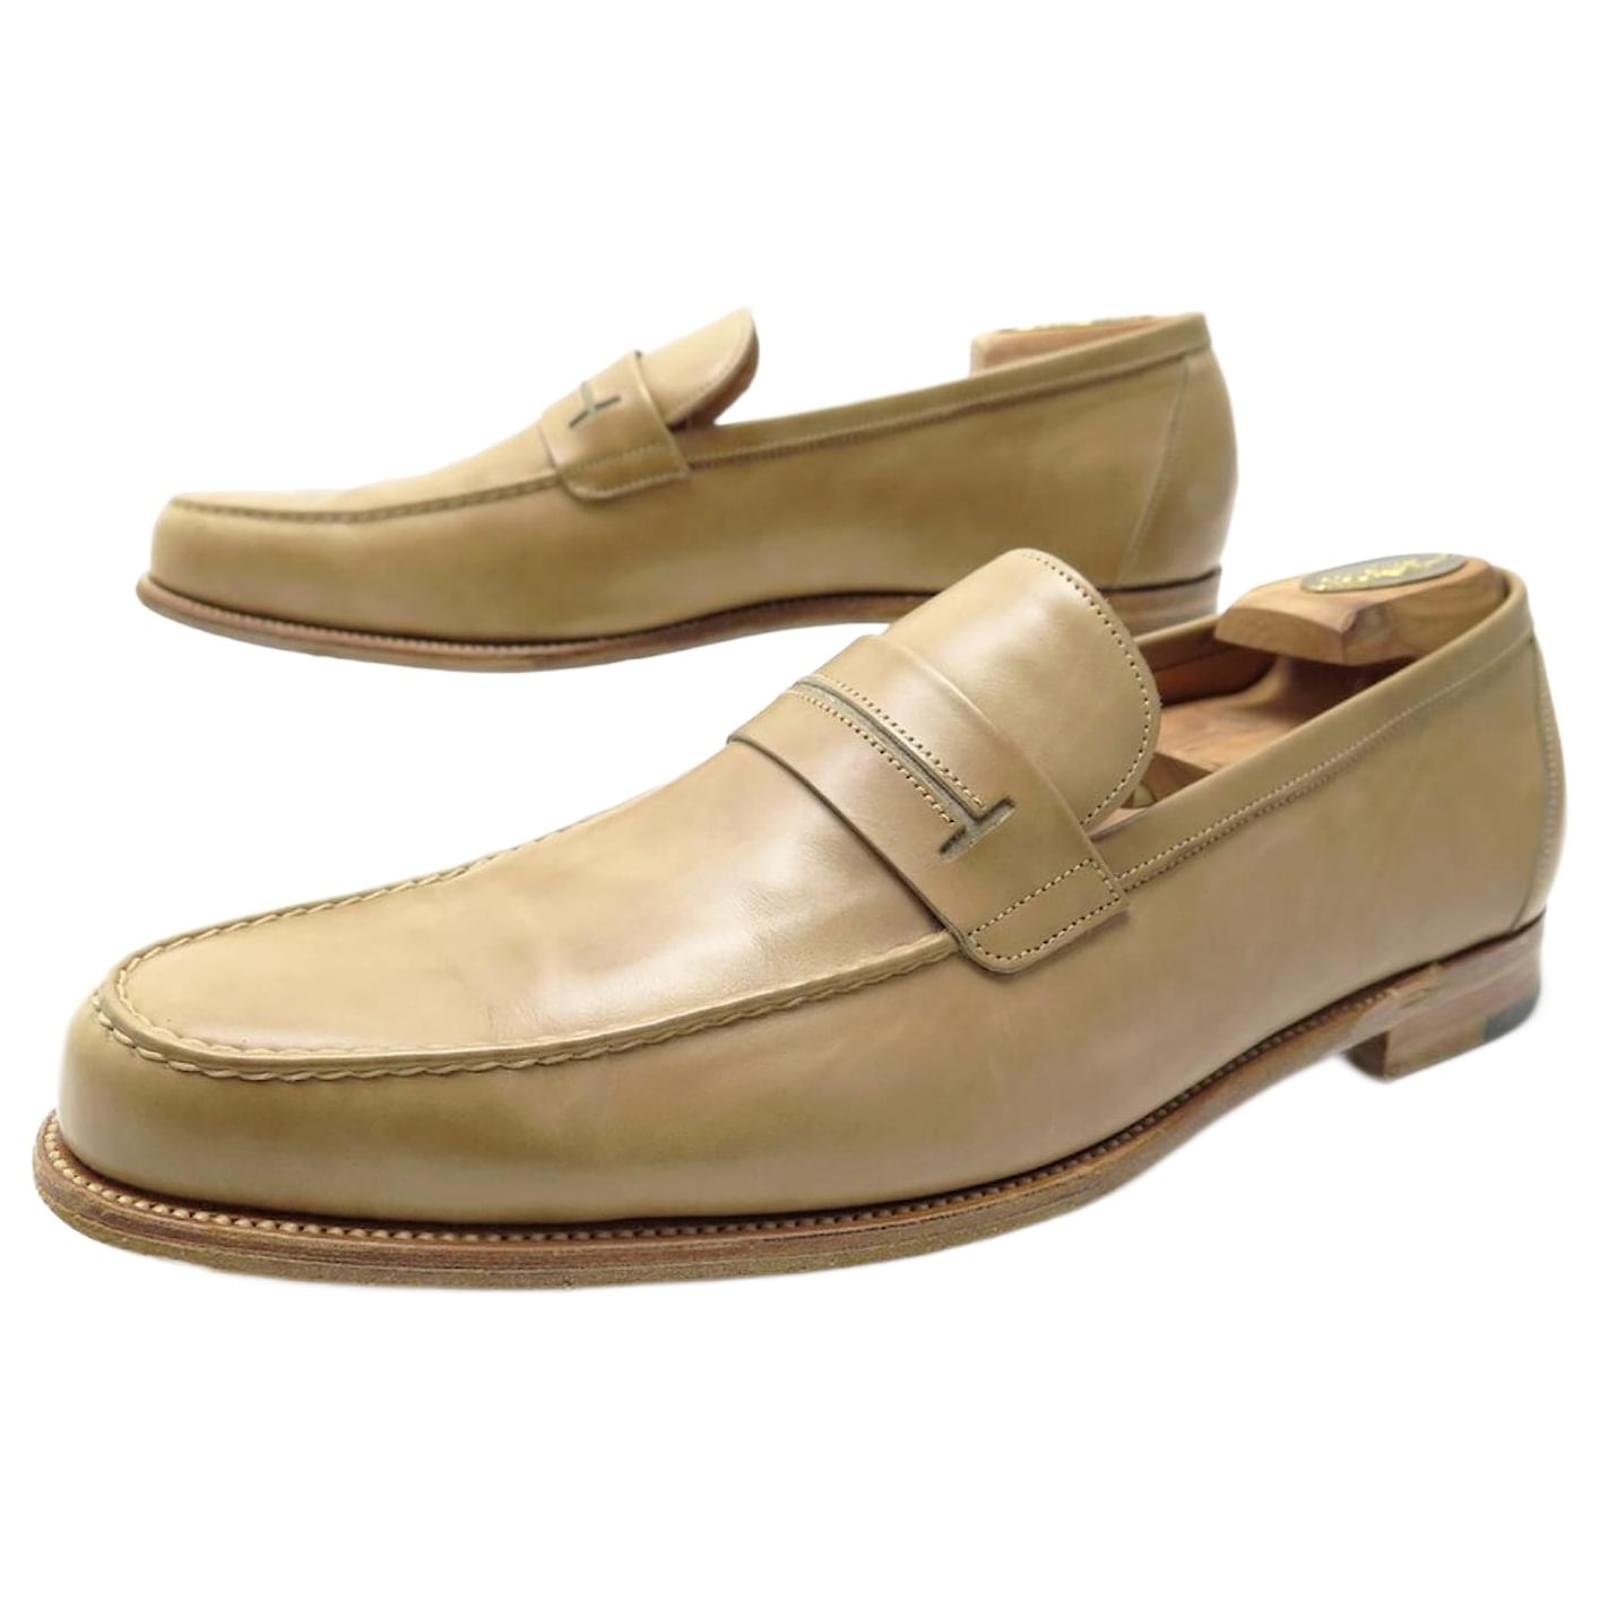 Hermès HERMES SHOES KEITH MOCCASINS 44.5 IN CAMEL LEATHER LOAFERS